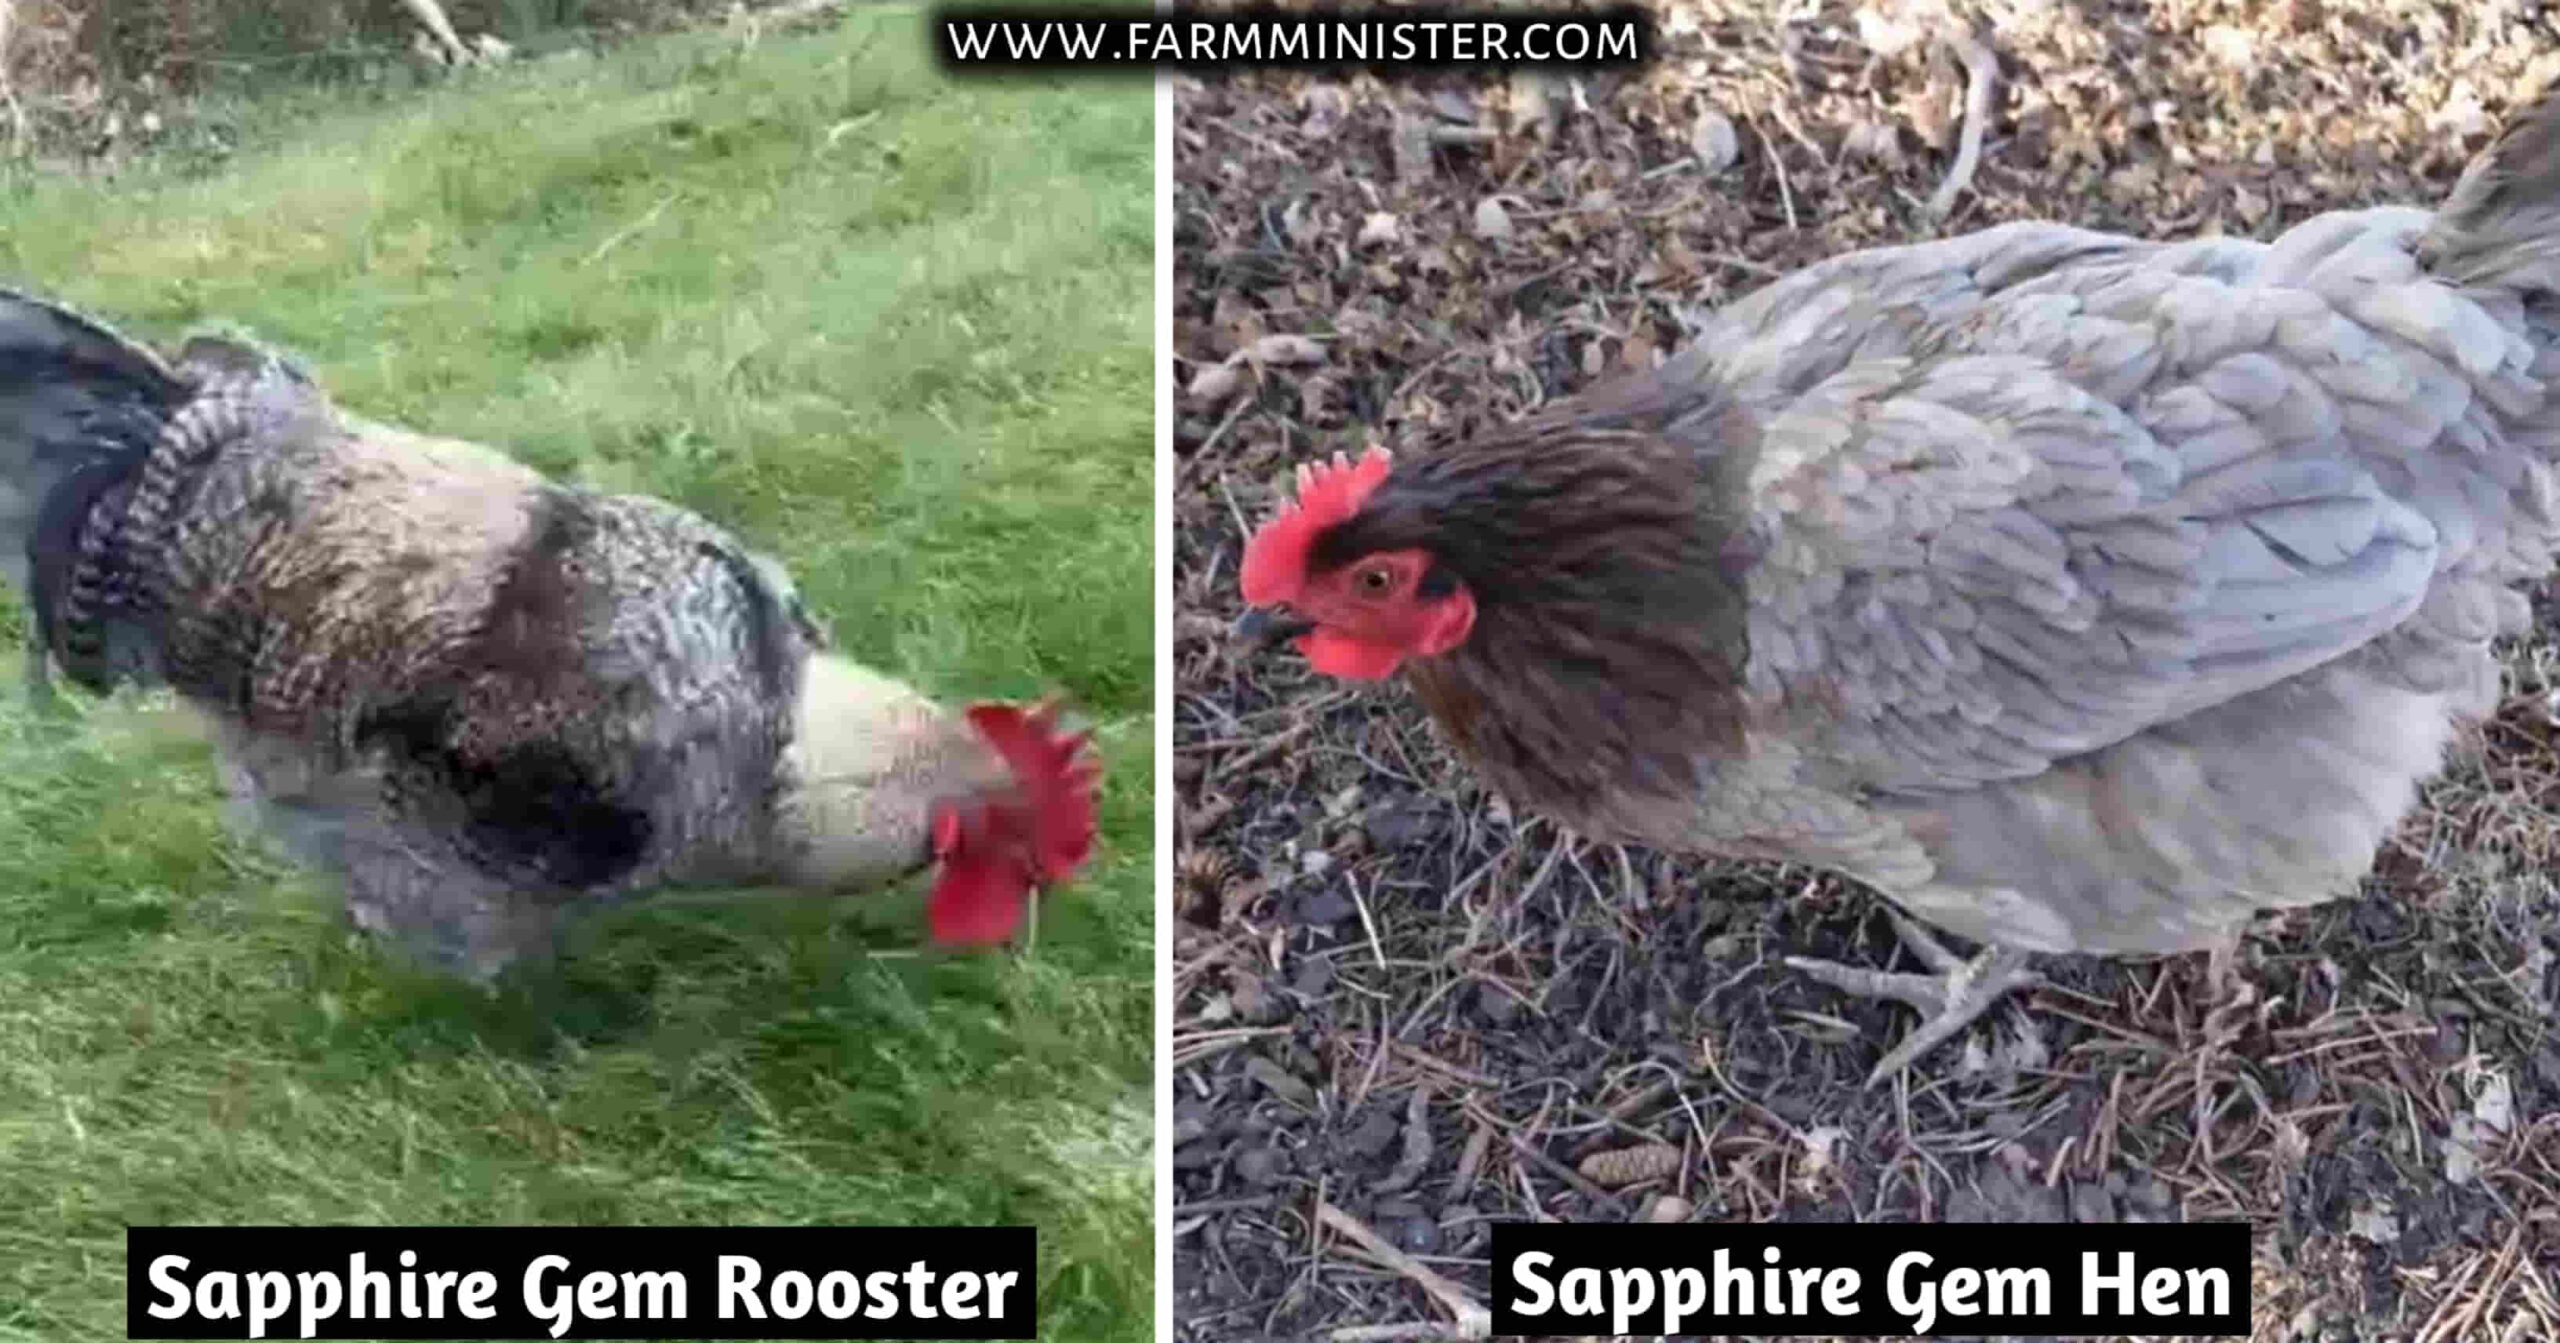 Sapphire Gem roosters Vs hens